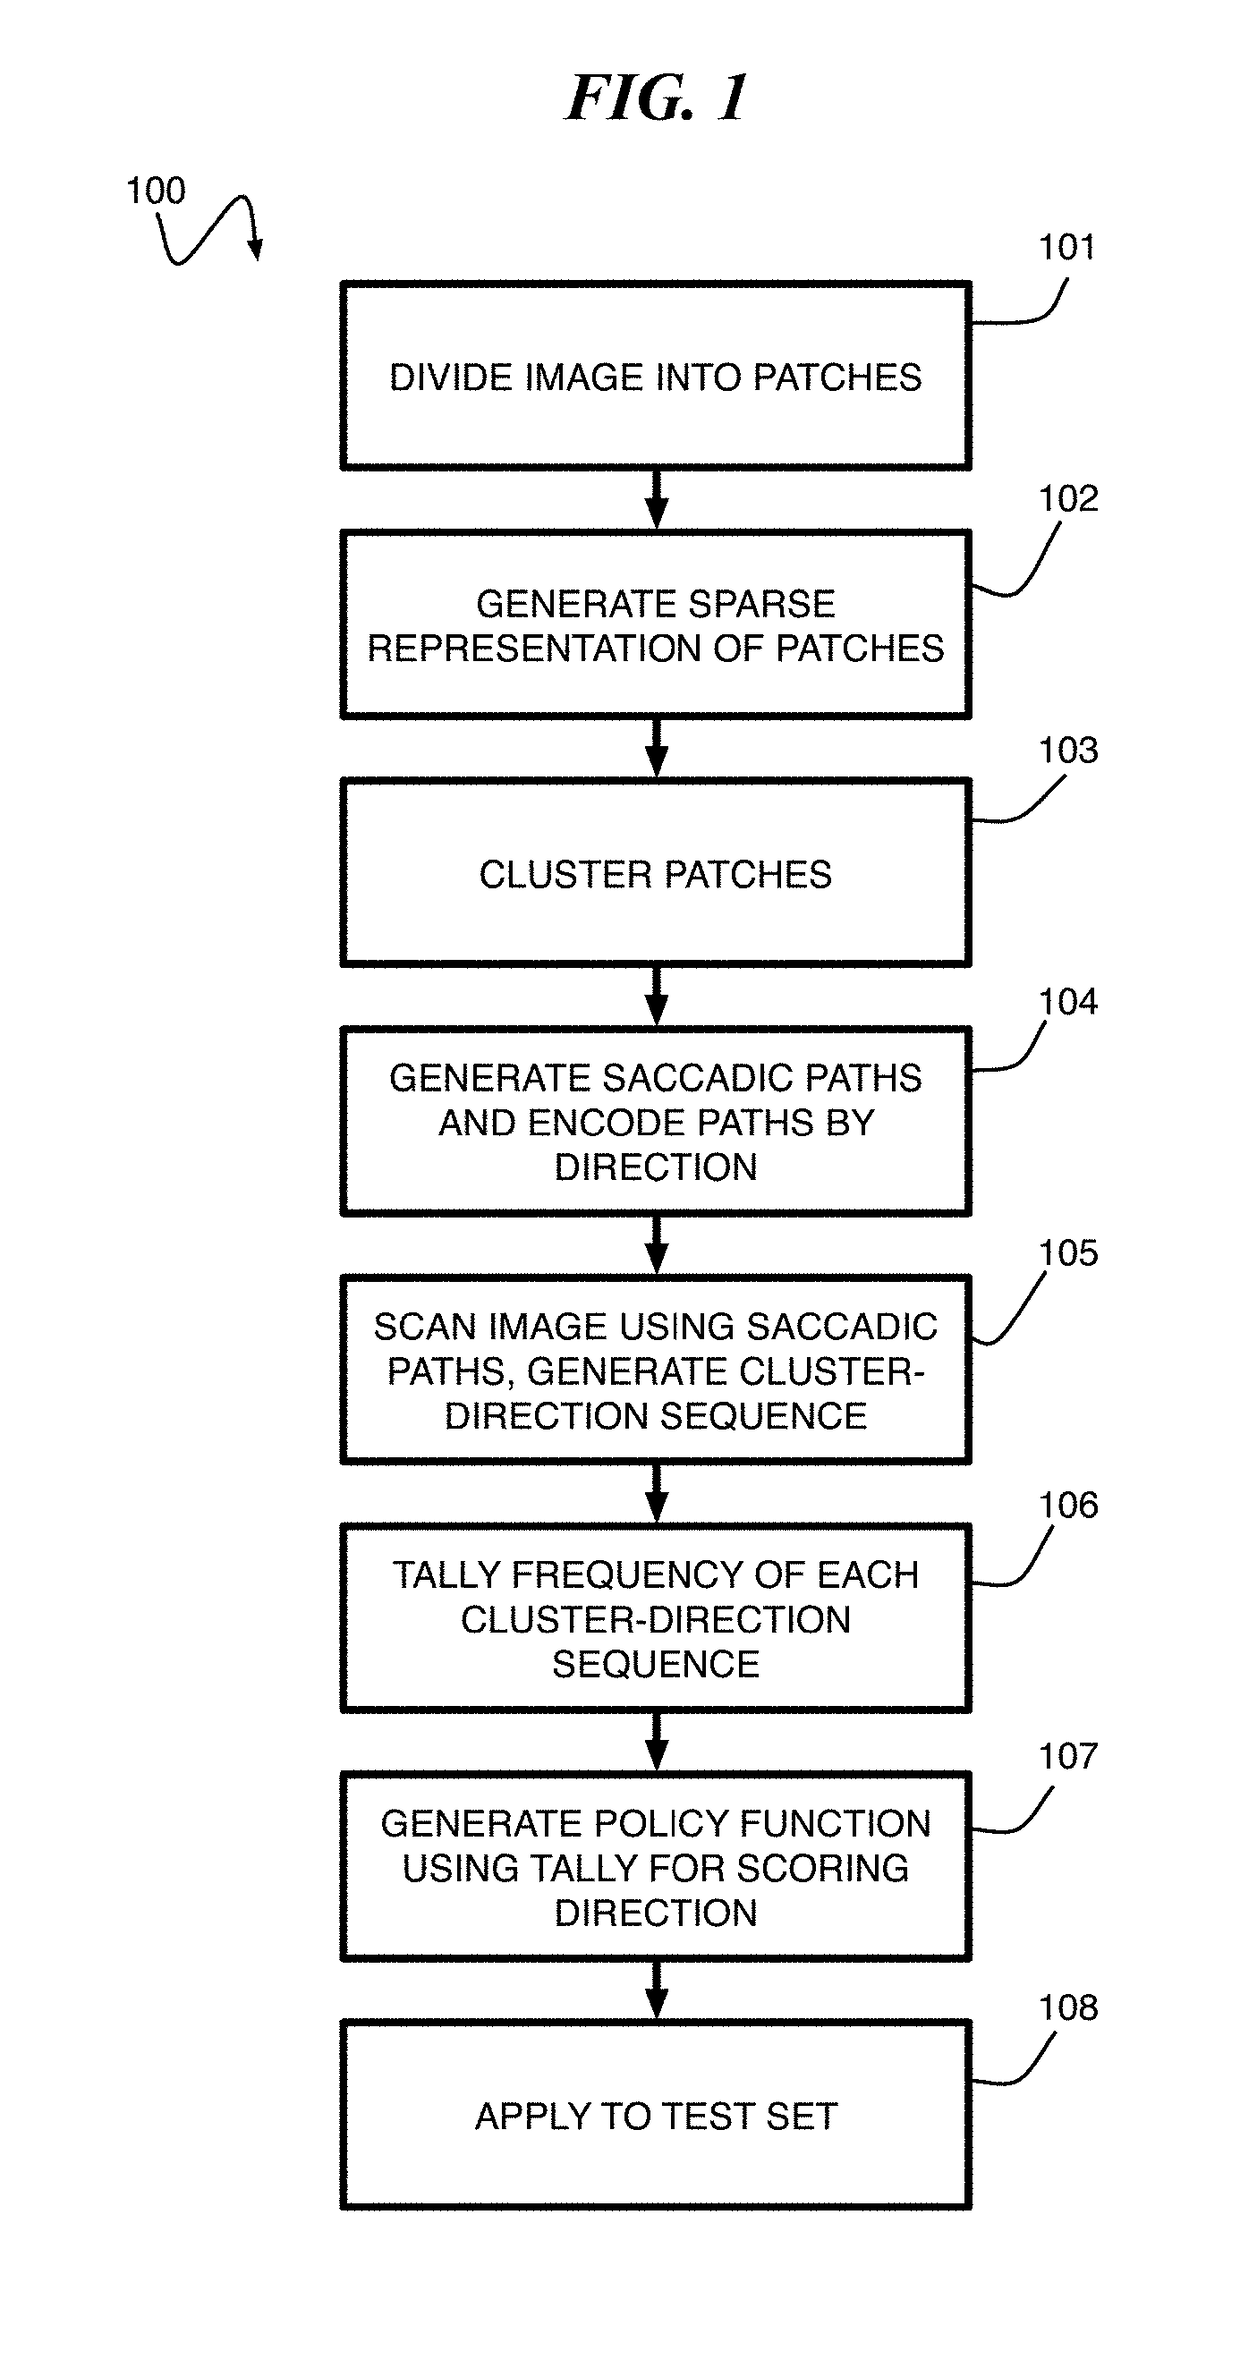 Visual object and event detection and prediction system using saccades